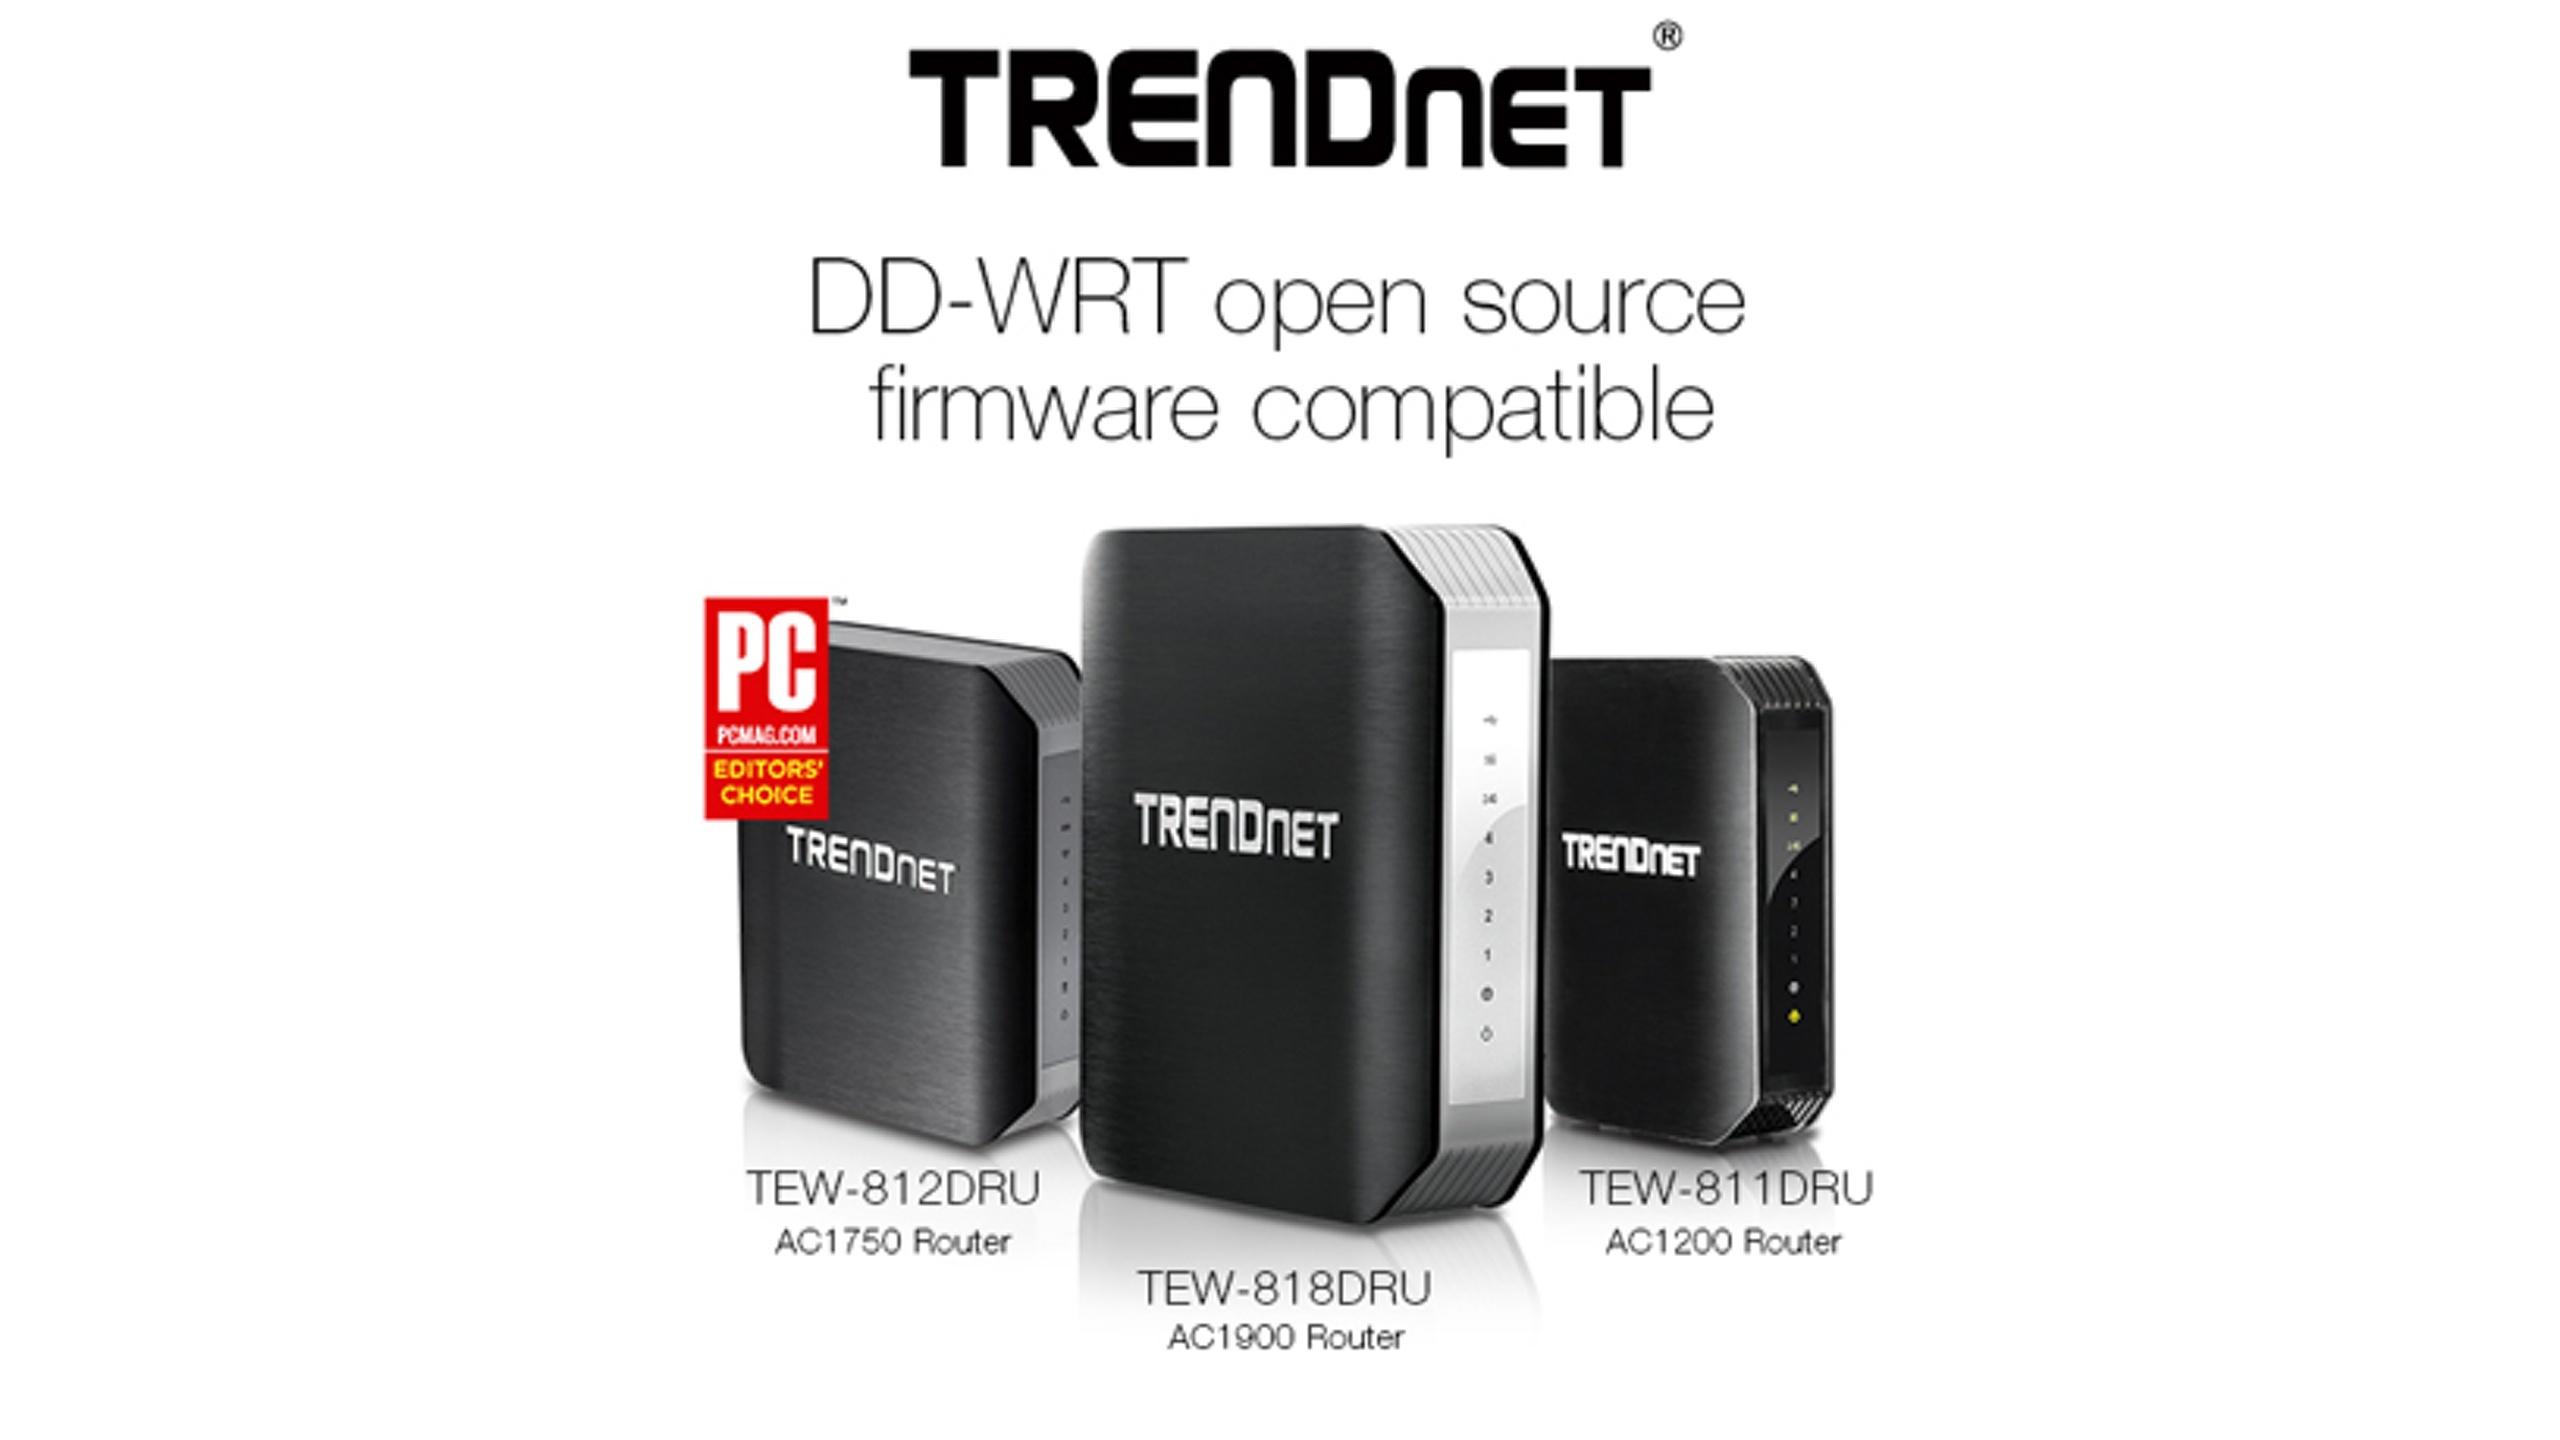 TRENDnet Logo - TRENDnet Makes Open Source DD-WRT Firmware Available for its Routers